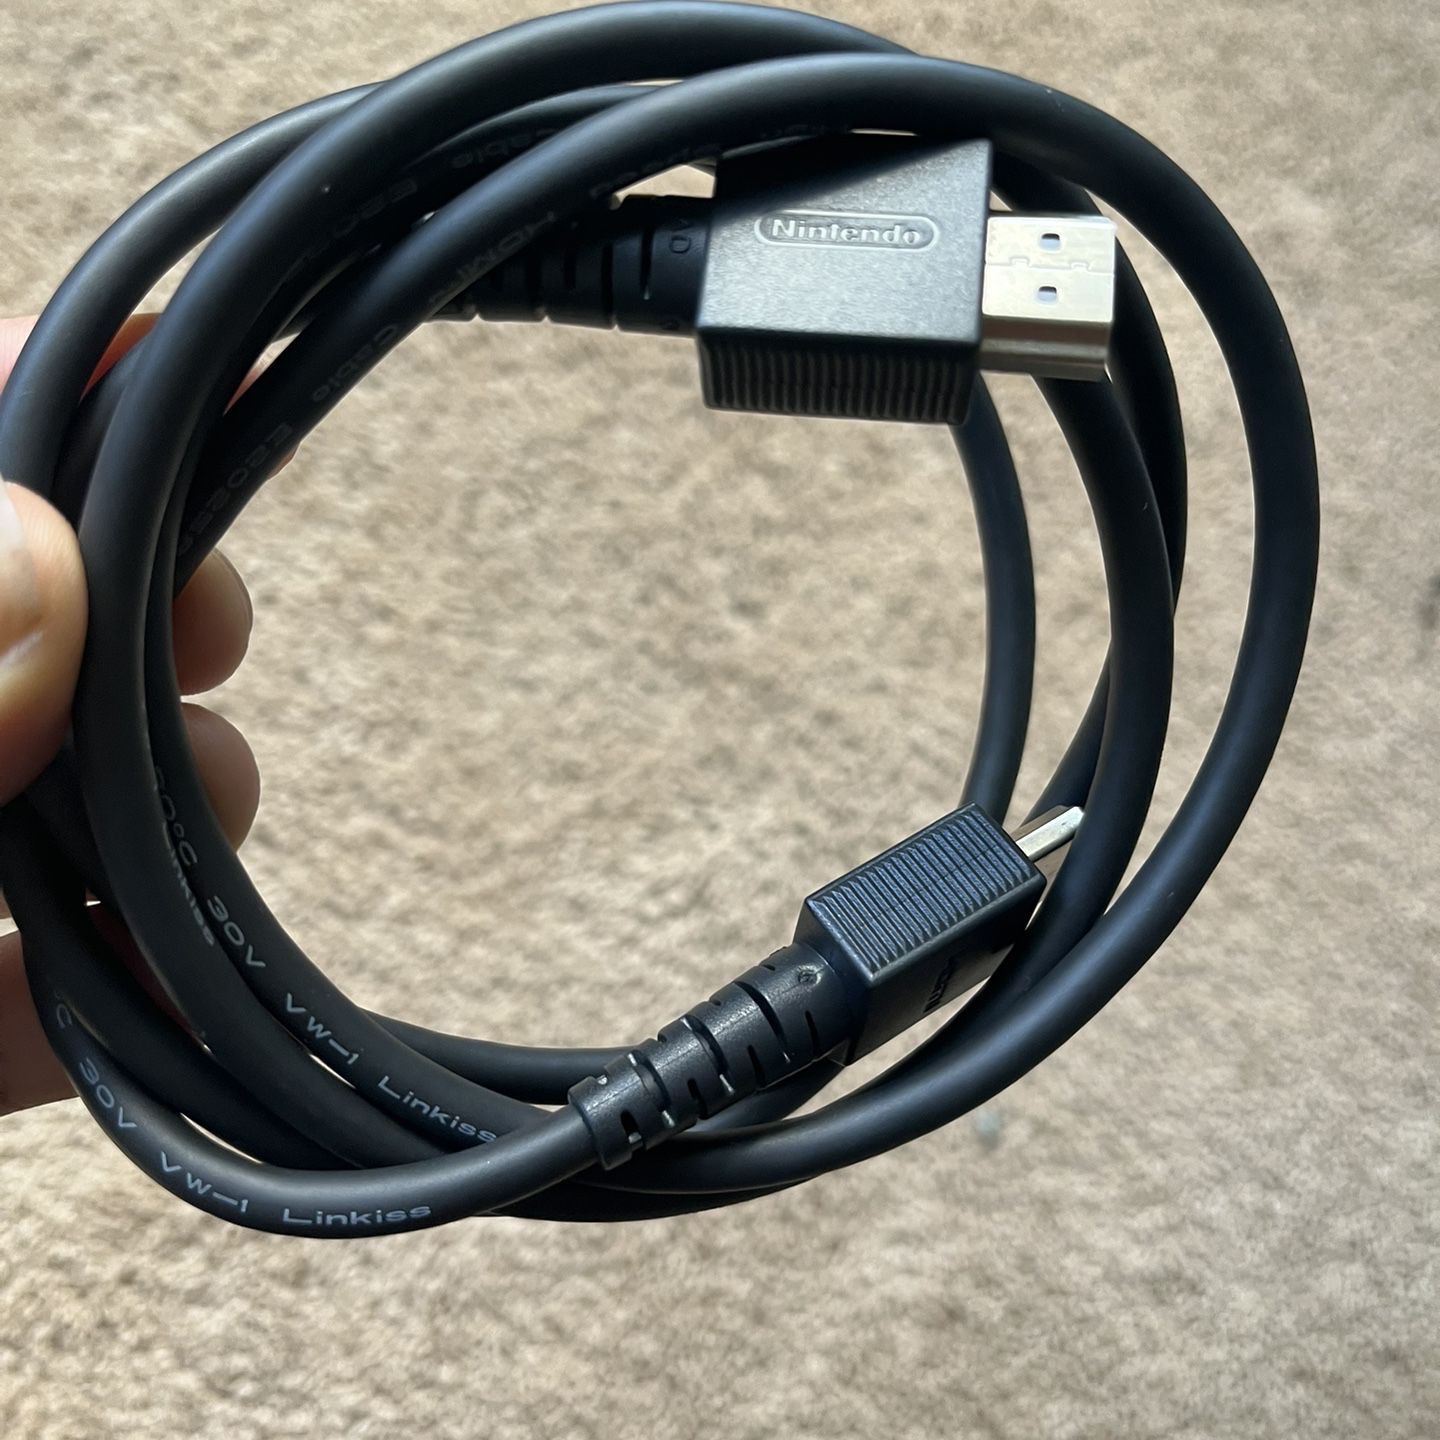 Nintendo Switch HDMI cable for Sale in Grand Terrace, CA - OfferUp